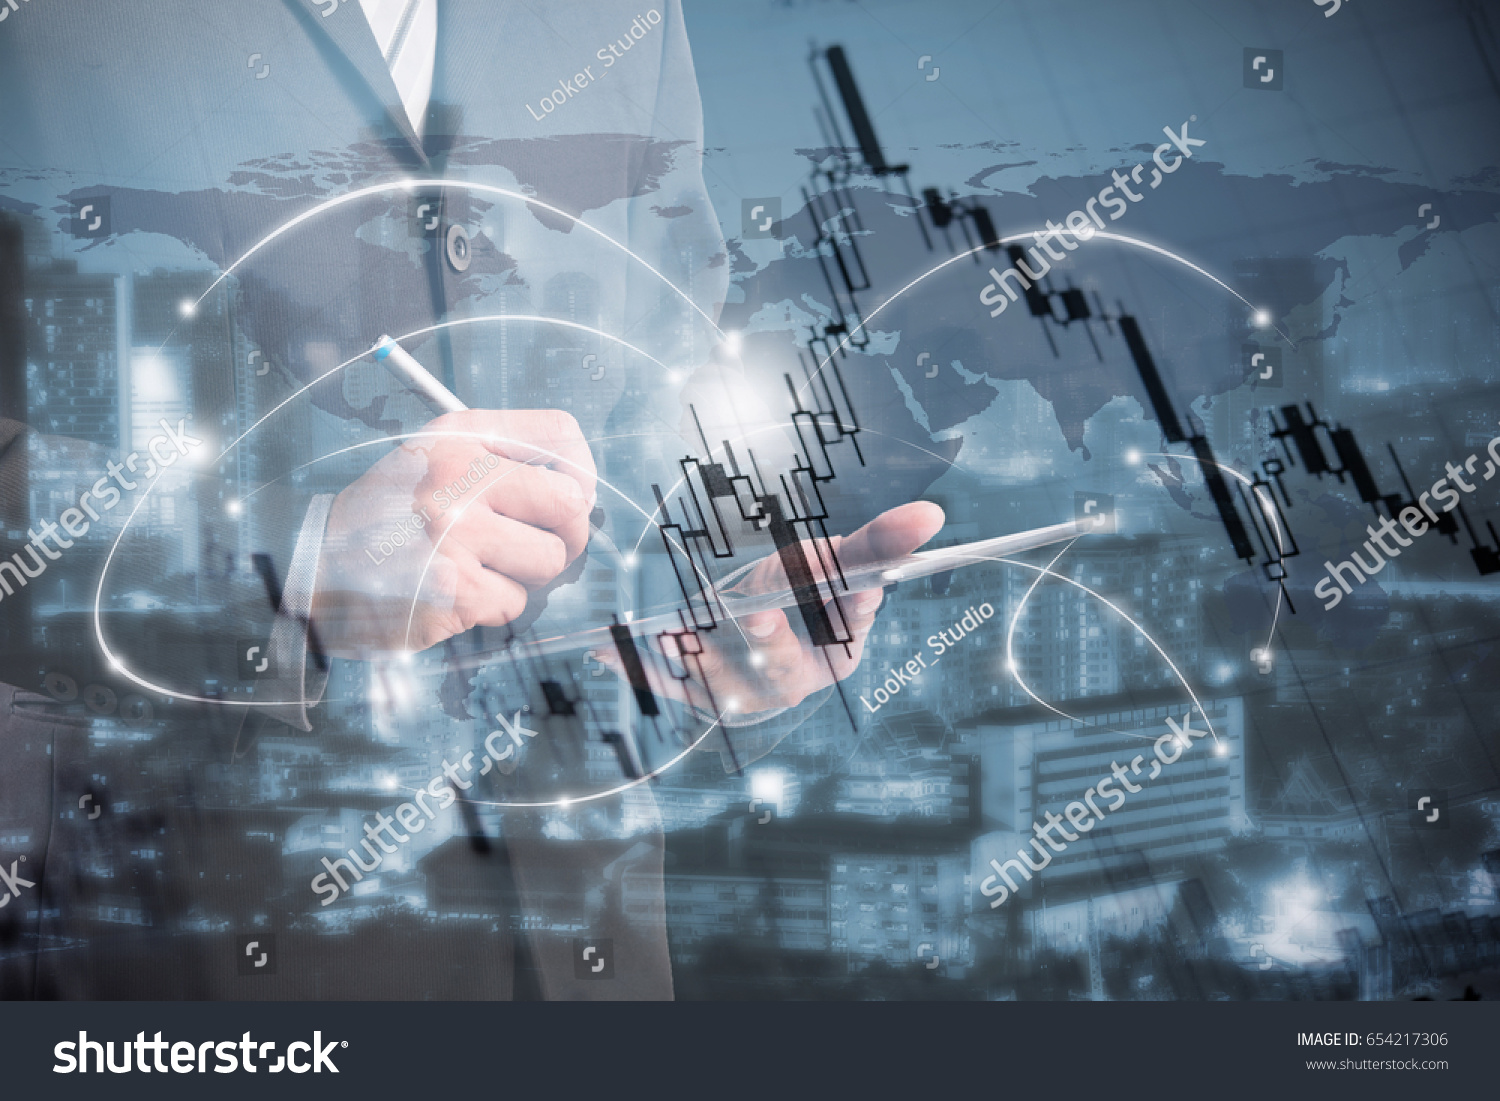 double exposure of businessman using tablet with blur city night and stockgraph. #654217306